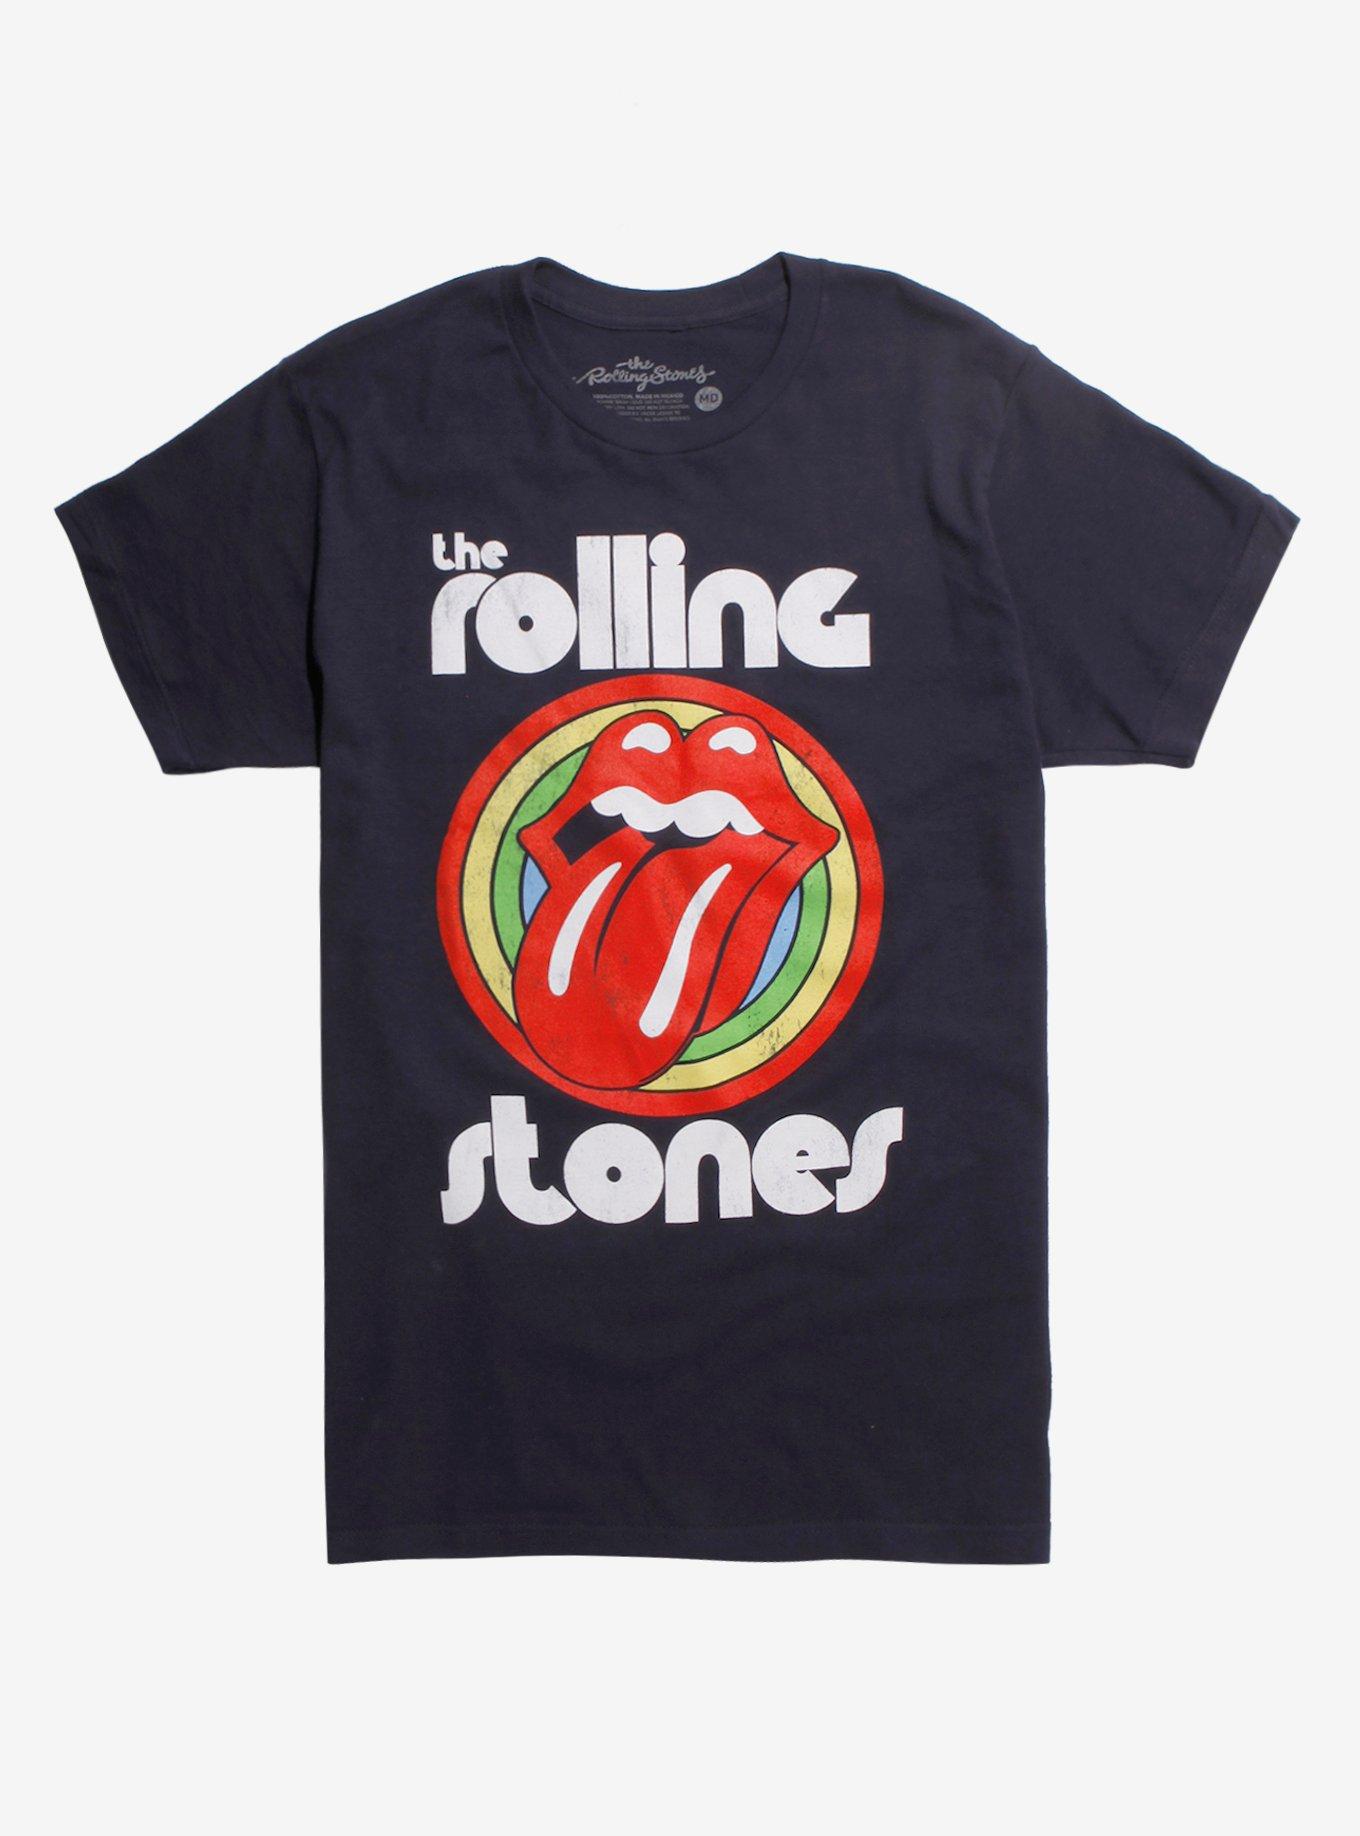 The Rolling Stones Circles T-Shirt | Hot Topic